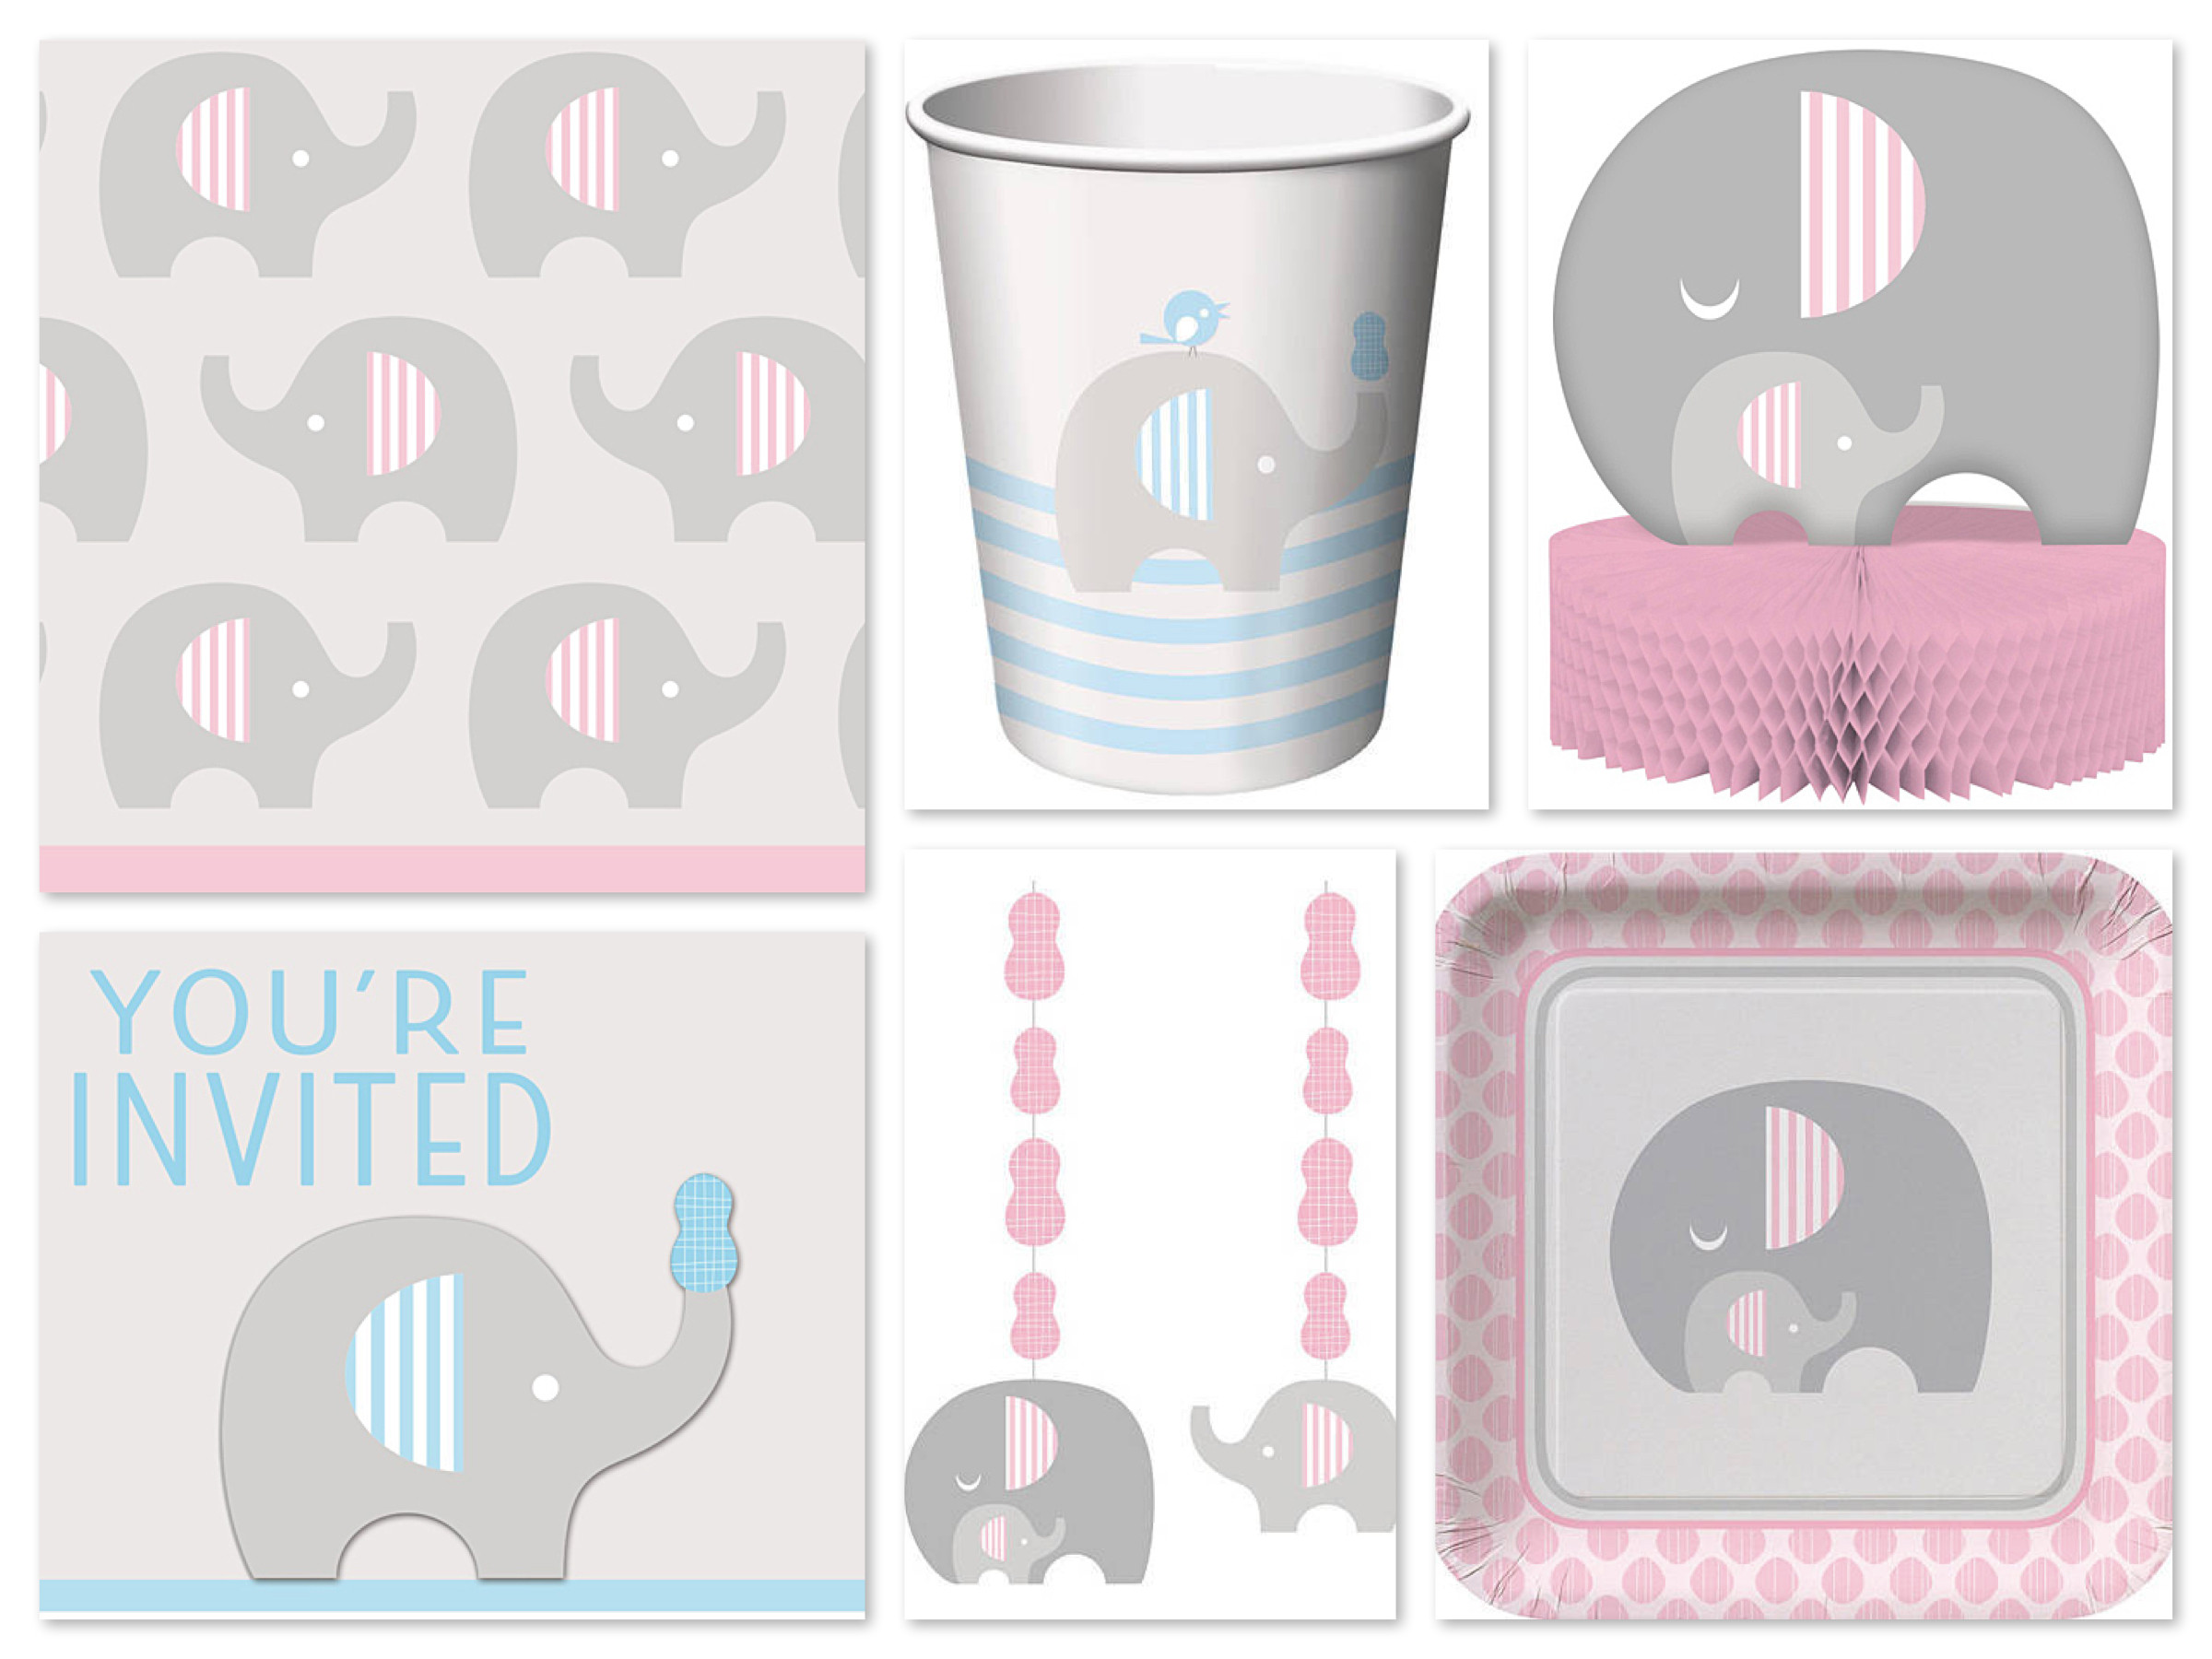 Baby Elephant Party Supplies
 Elephant Themed Party Planning Ideas & Supplies